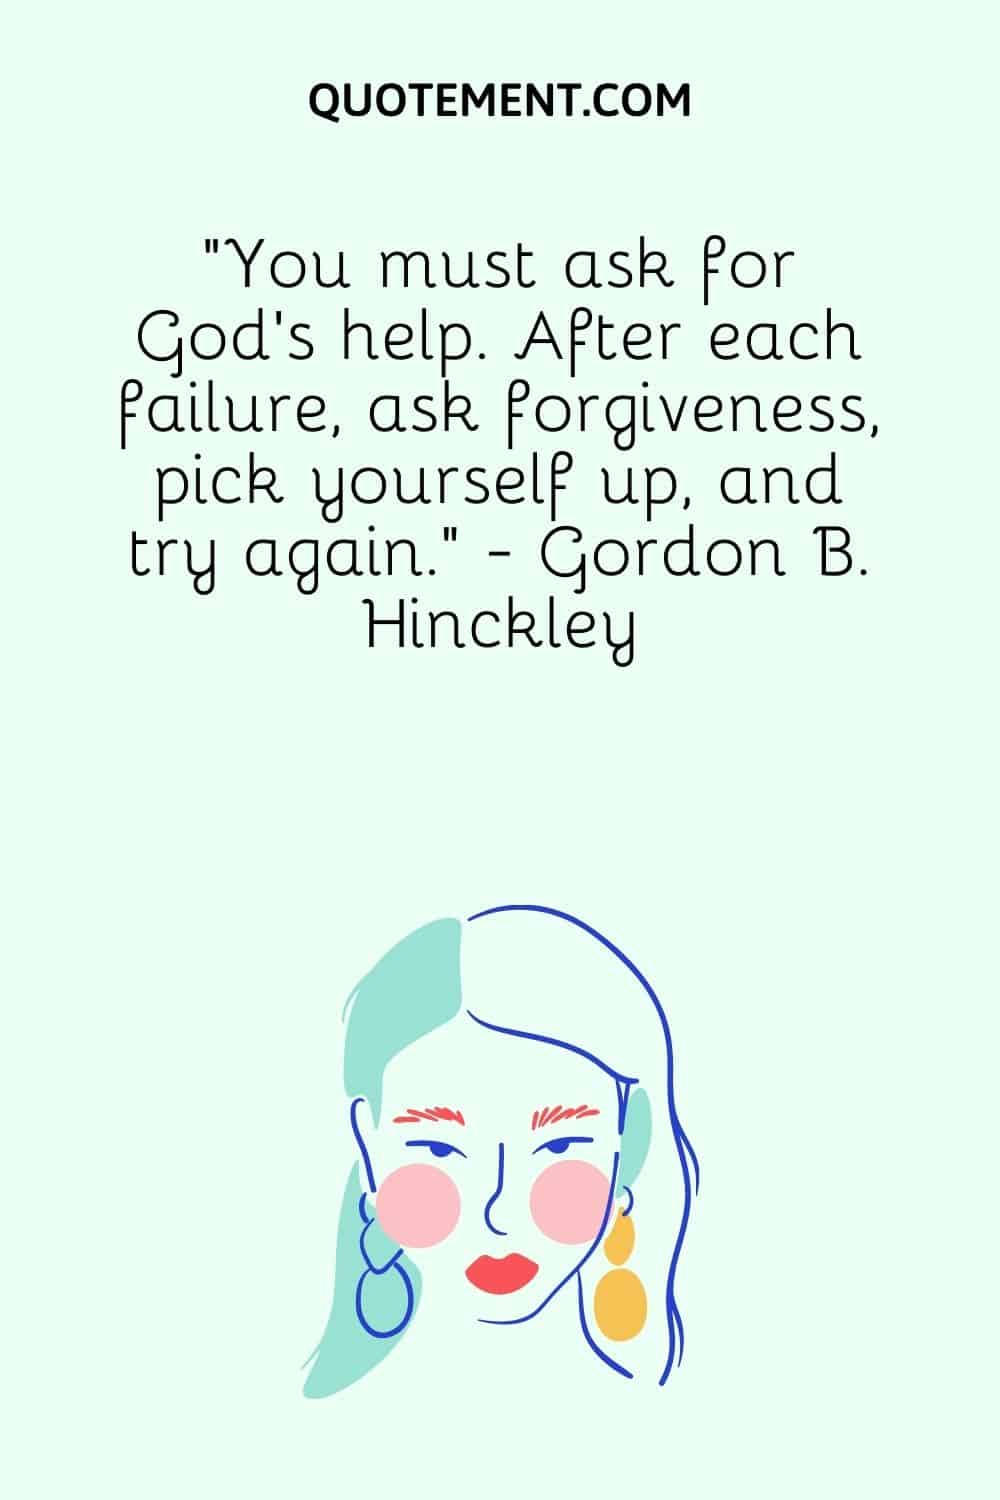 “You must ask for God's help. After each failure, ask forgiveness, pick yourself up, and try again.” - Gordon B. Hinckley